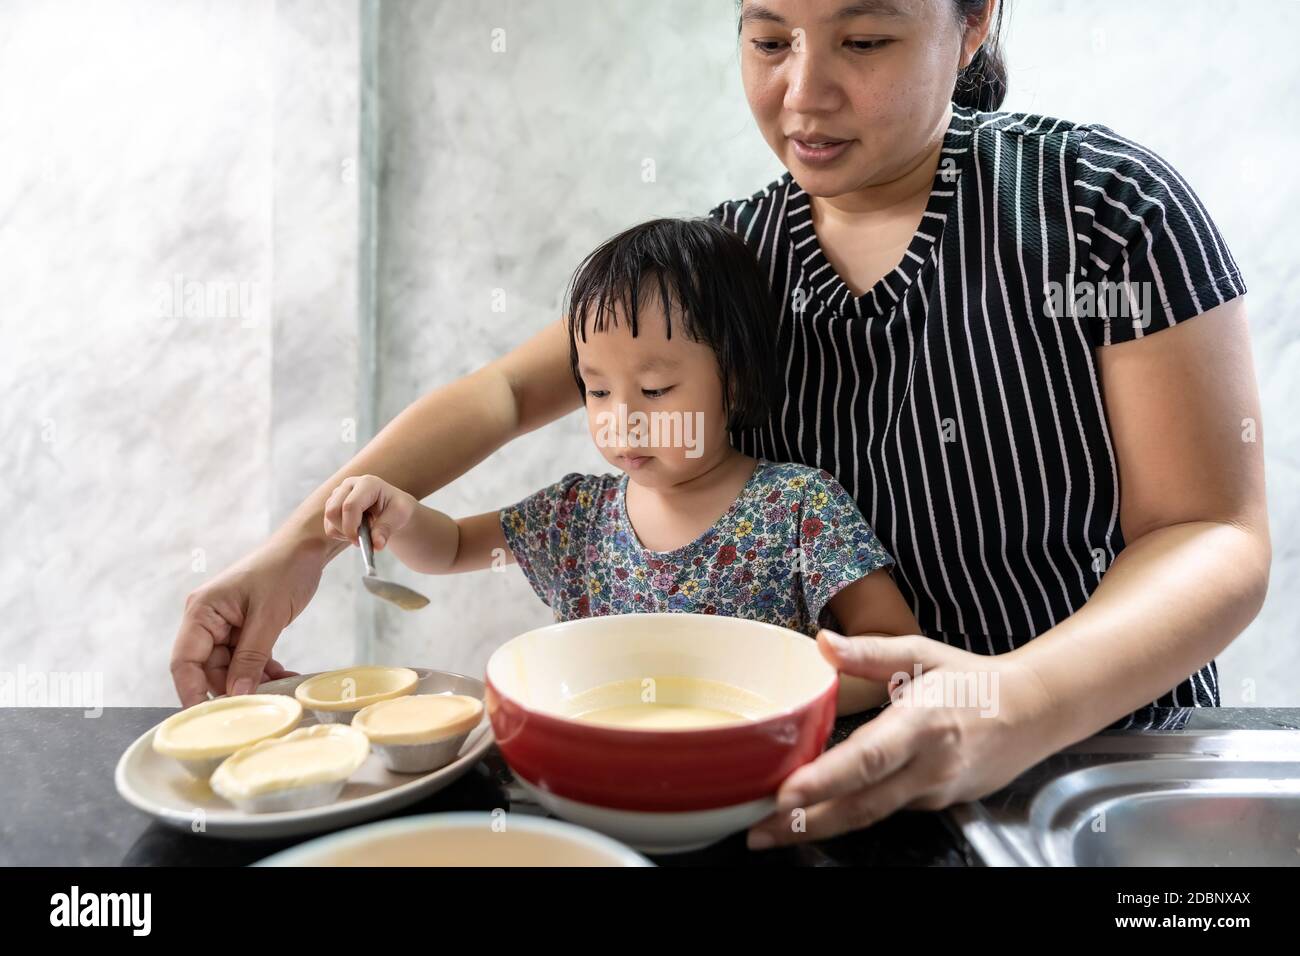 Asian girl cooking egg tart bakery with her mom, housework for child make executive function for kid. Houseworking food lifstyle and family concept. Stock Photo